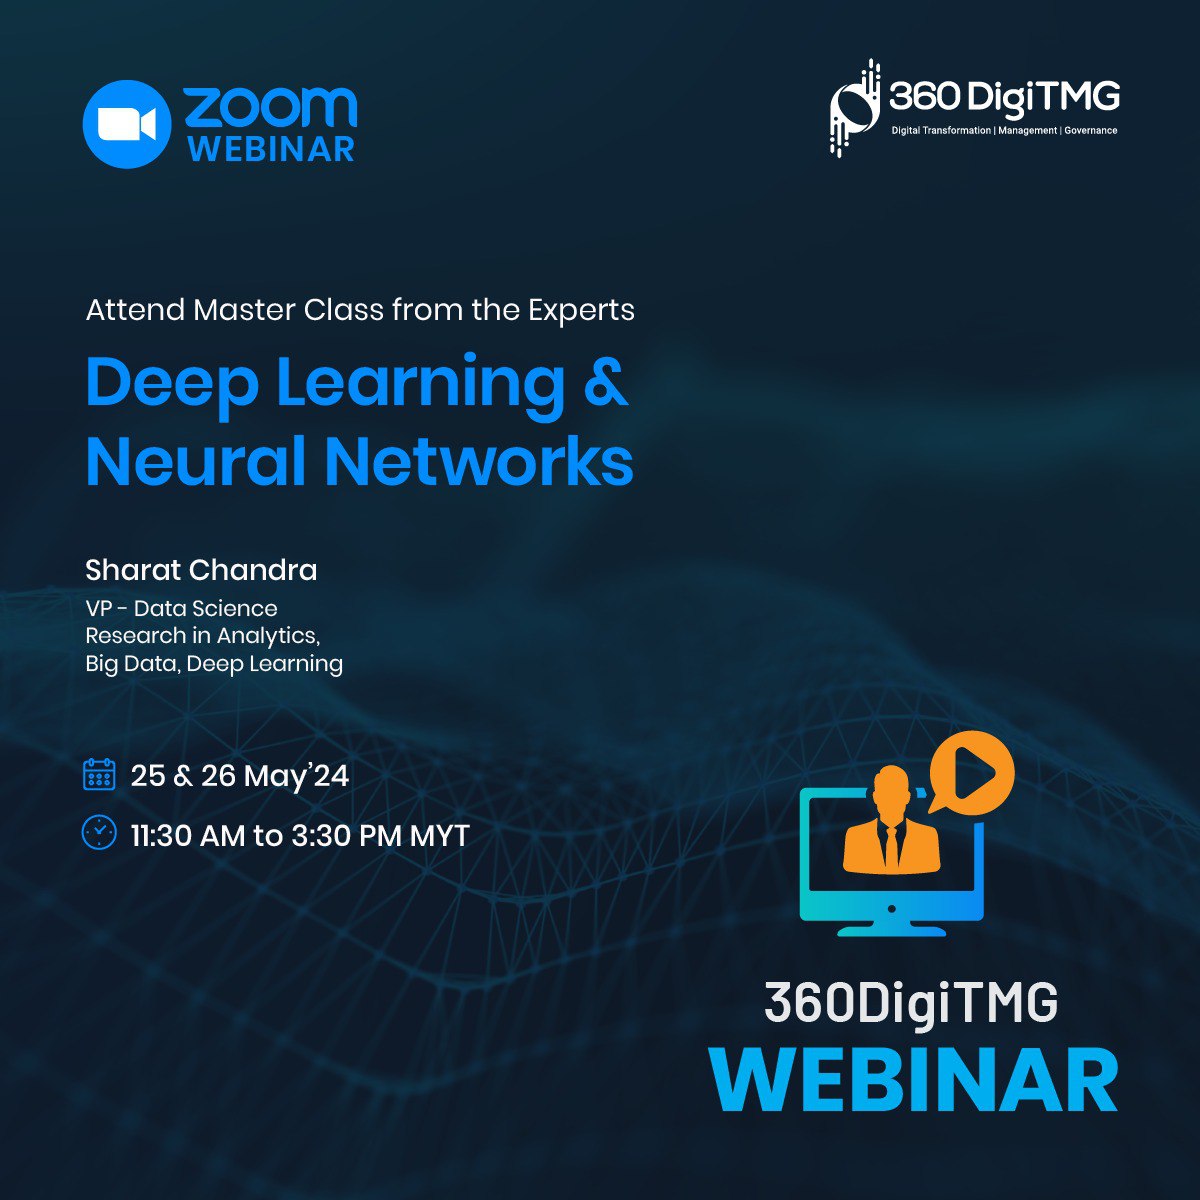 🚀 Dive into Deep Learning & NN Mastery! Don't miss our exclusive webinar on May 25th & 26th, 2024. 

👉 Click the link to join our exclusive Webinar: 
360digitmg.zoom.us/j/84738769866?…

Follow us on Facebook for updates:
facebook.com/360Digitmg.Mal… 

#webinar #deeplearning #360digitmgmalaysia